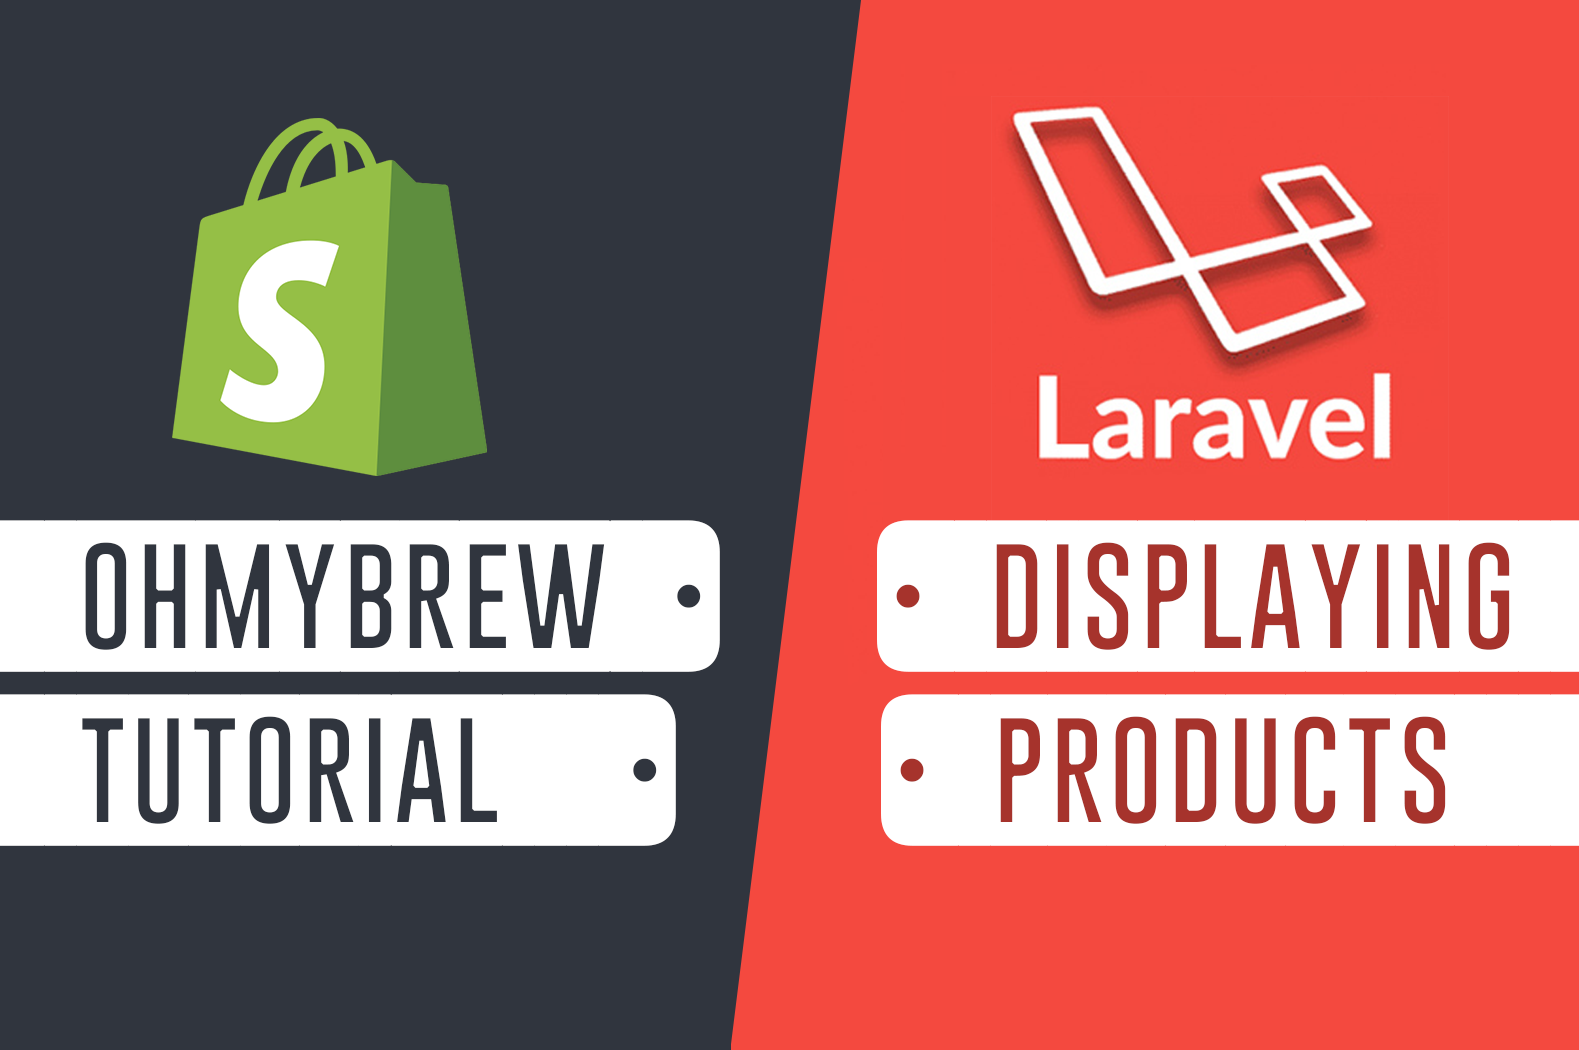 Shopify App Development with Laravel and Ohmybrew - Displaying Productspng